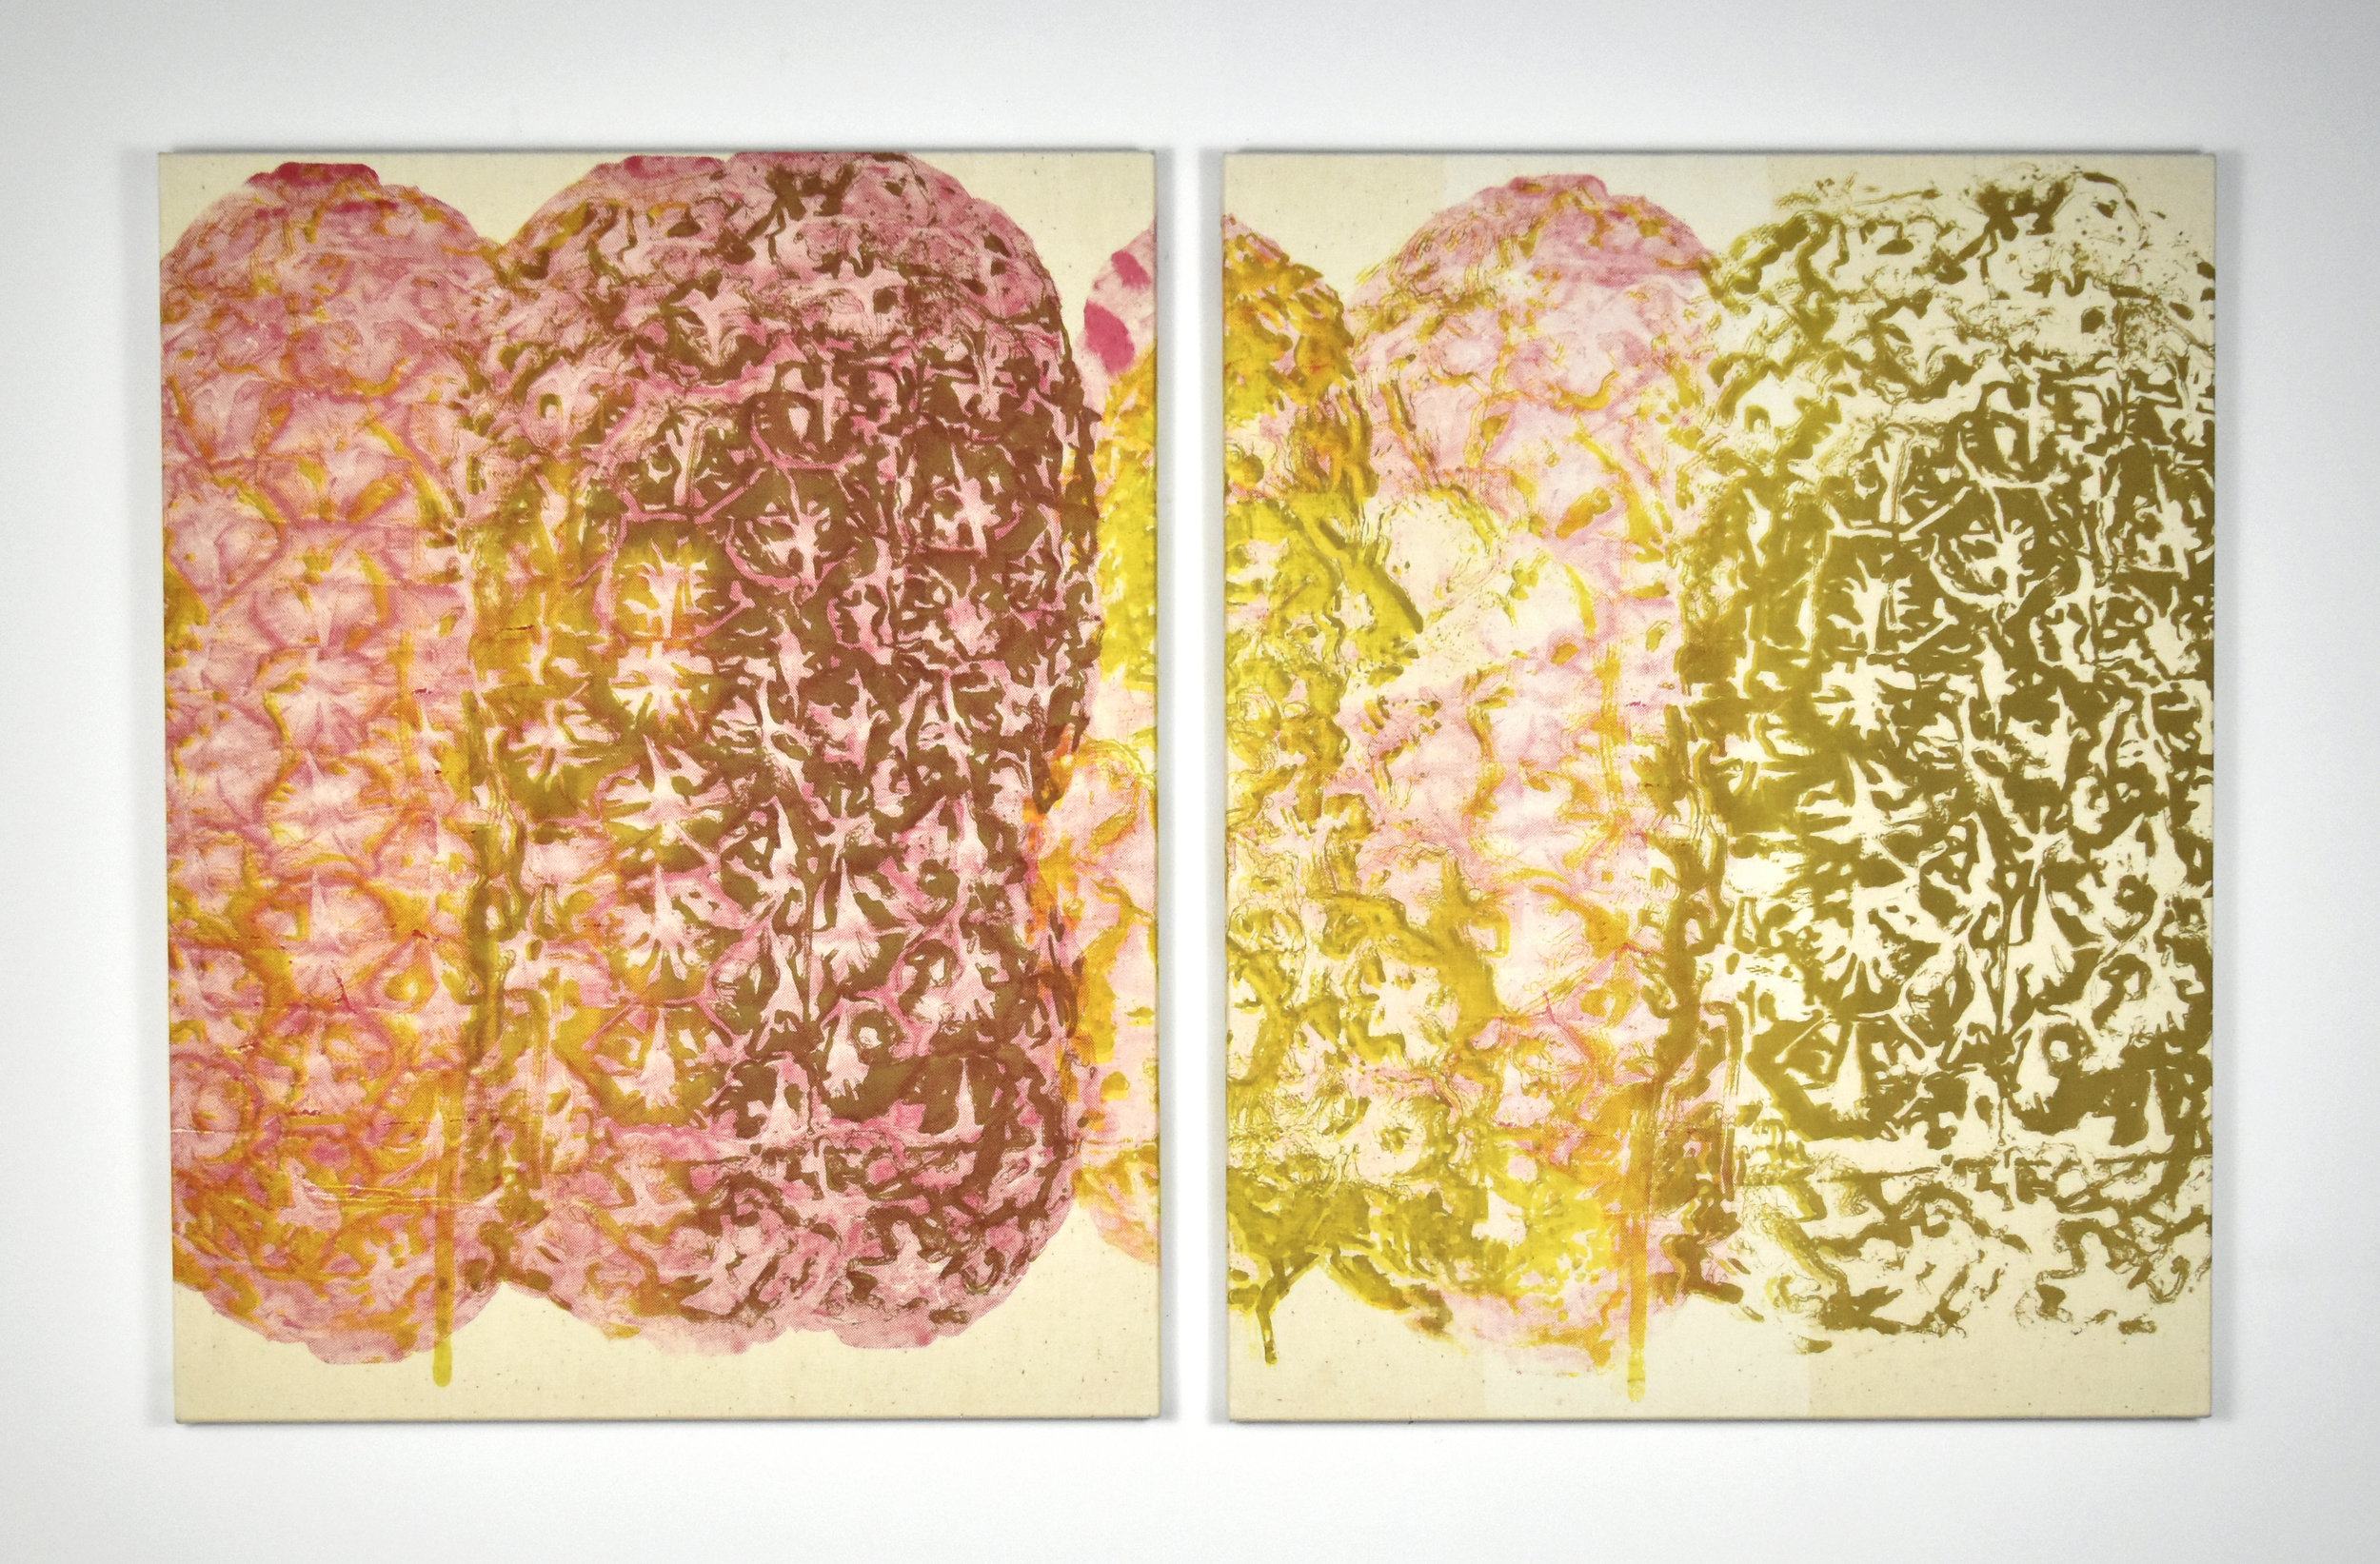   Piña Ooze Diptych , 2014.&nbsp;Silkscreen on muslin, 28" x 44" overall  (In Private Collection) 